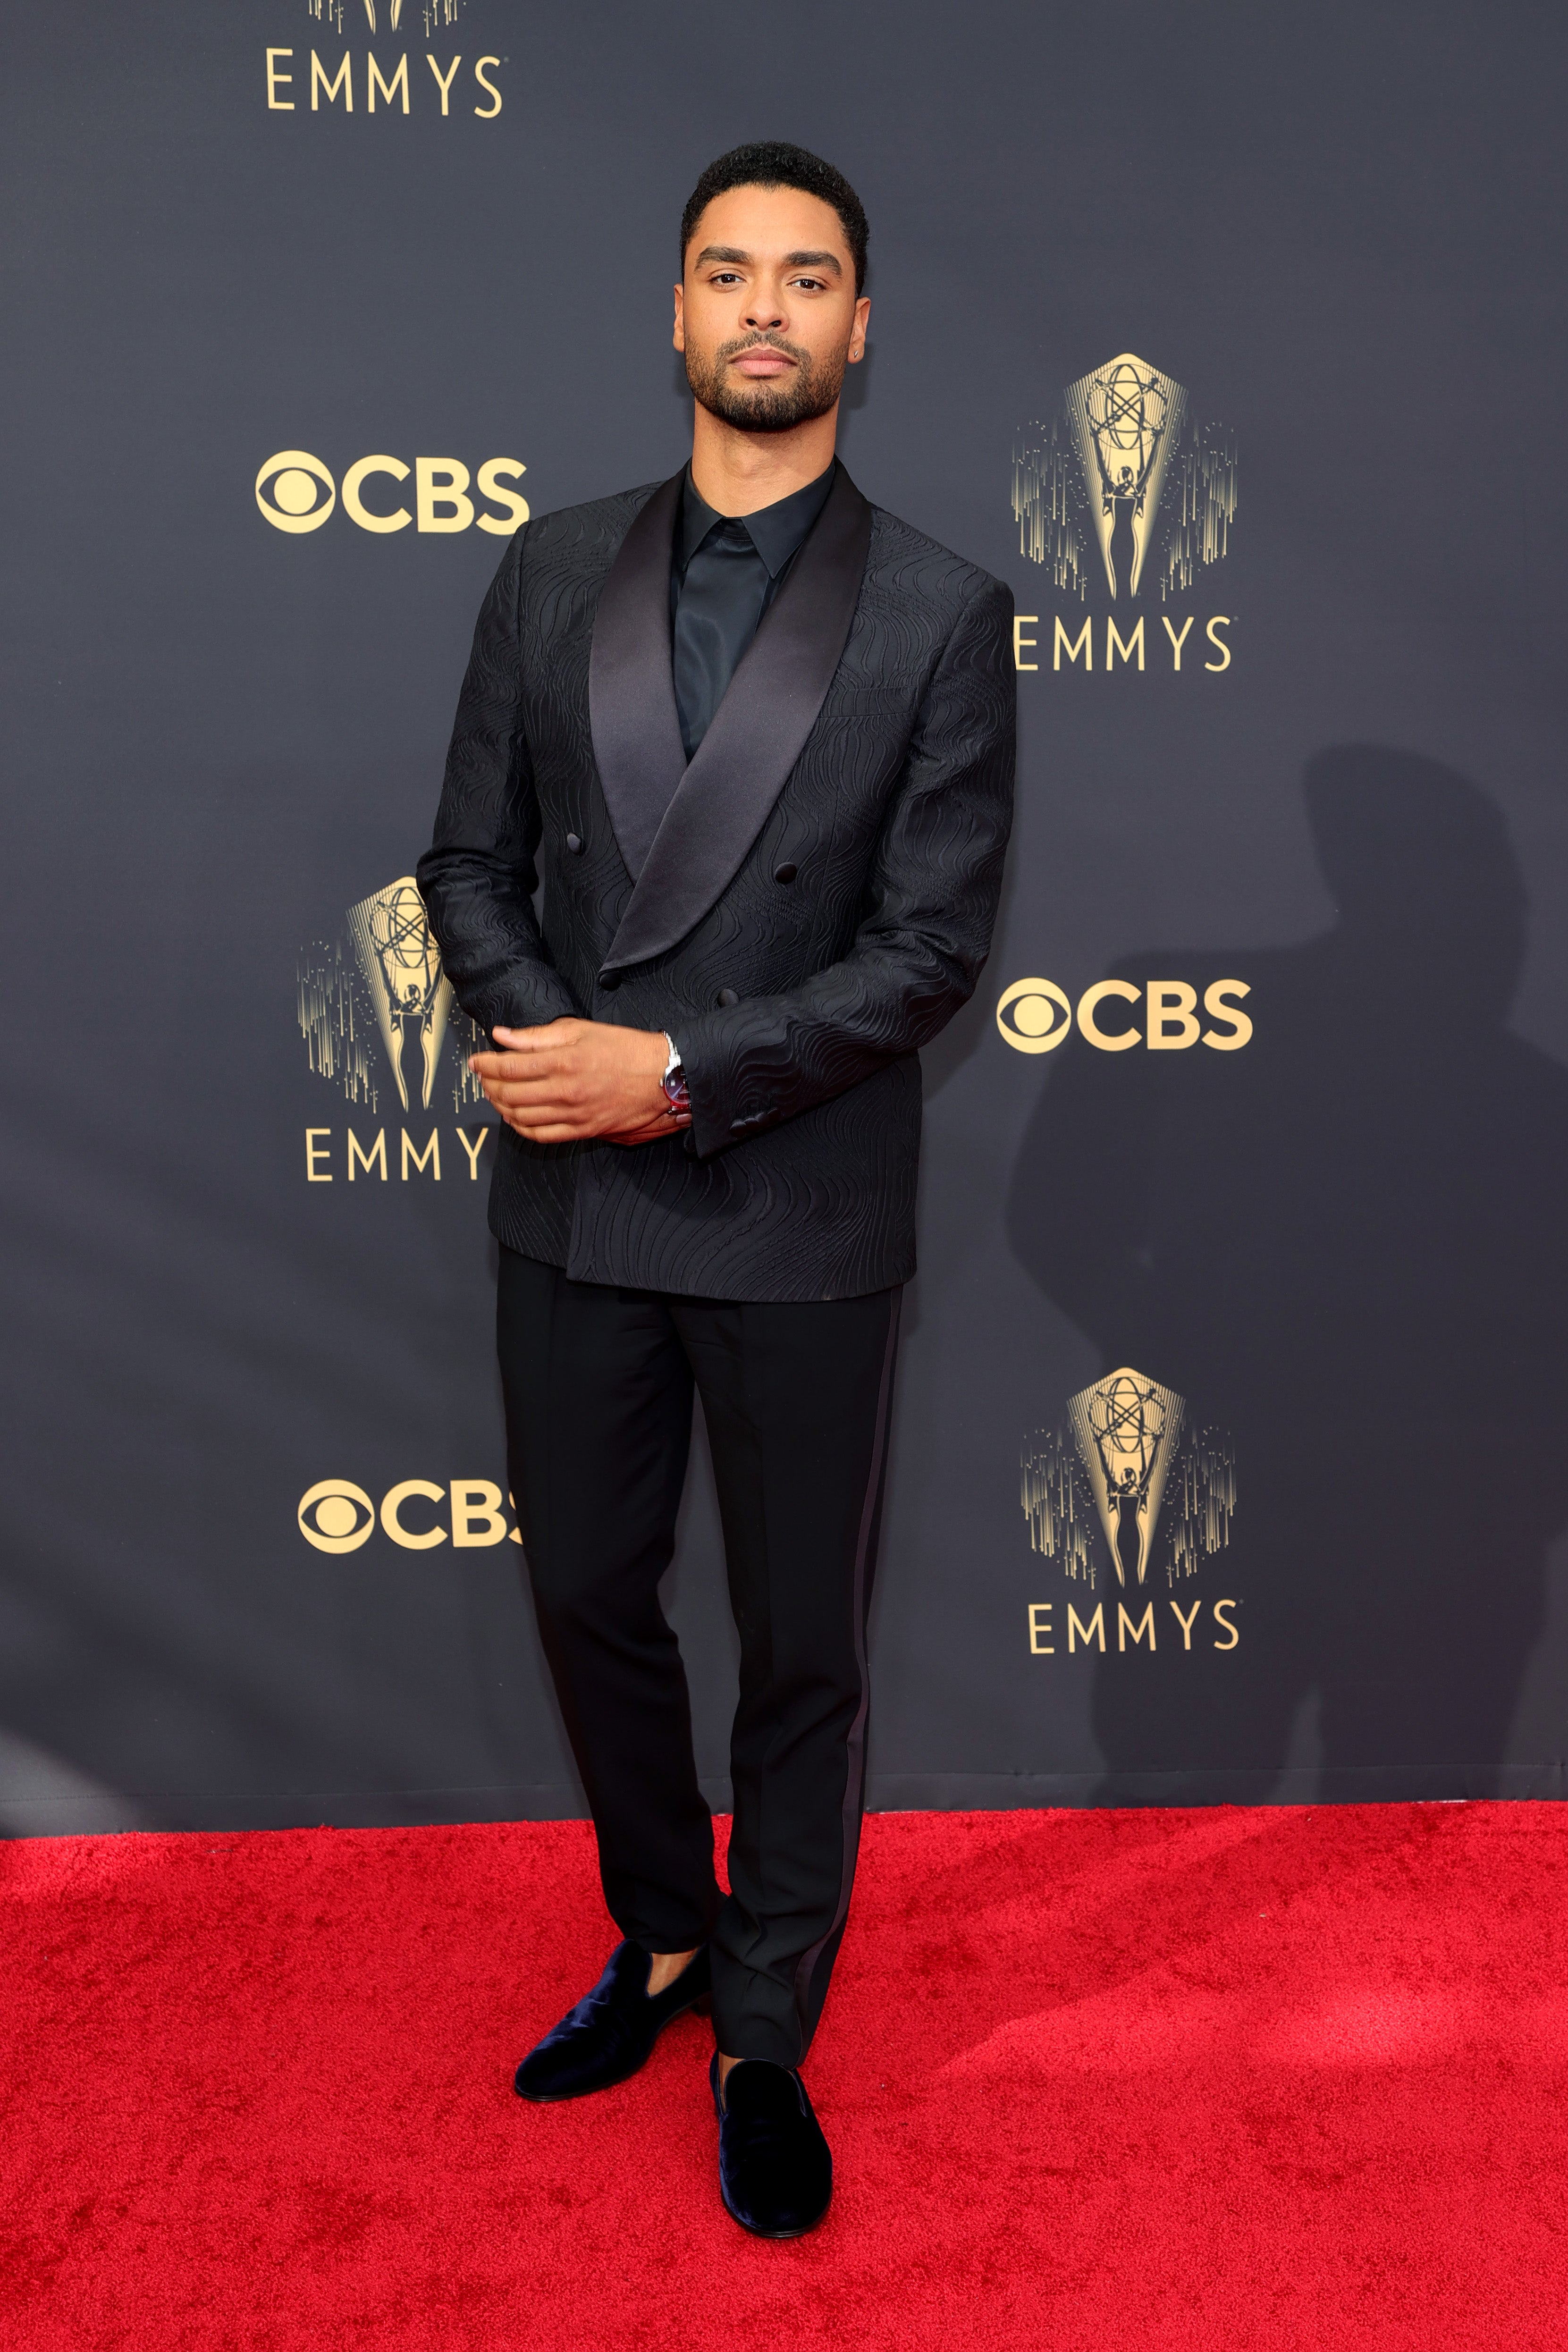 Rege-Jean Page at the 2021 Emmy Awards